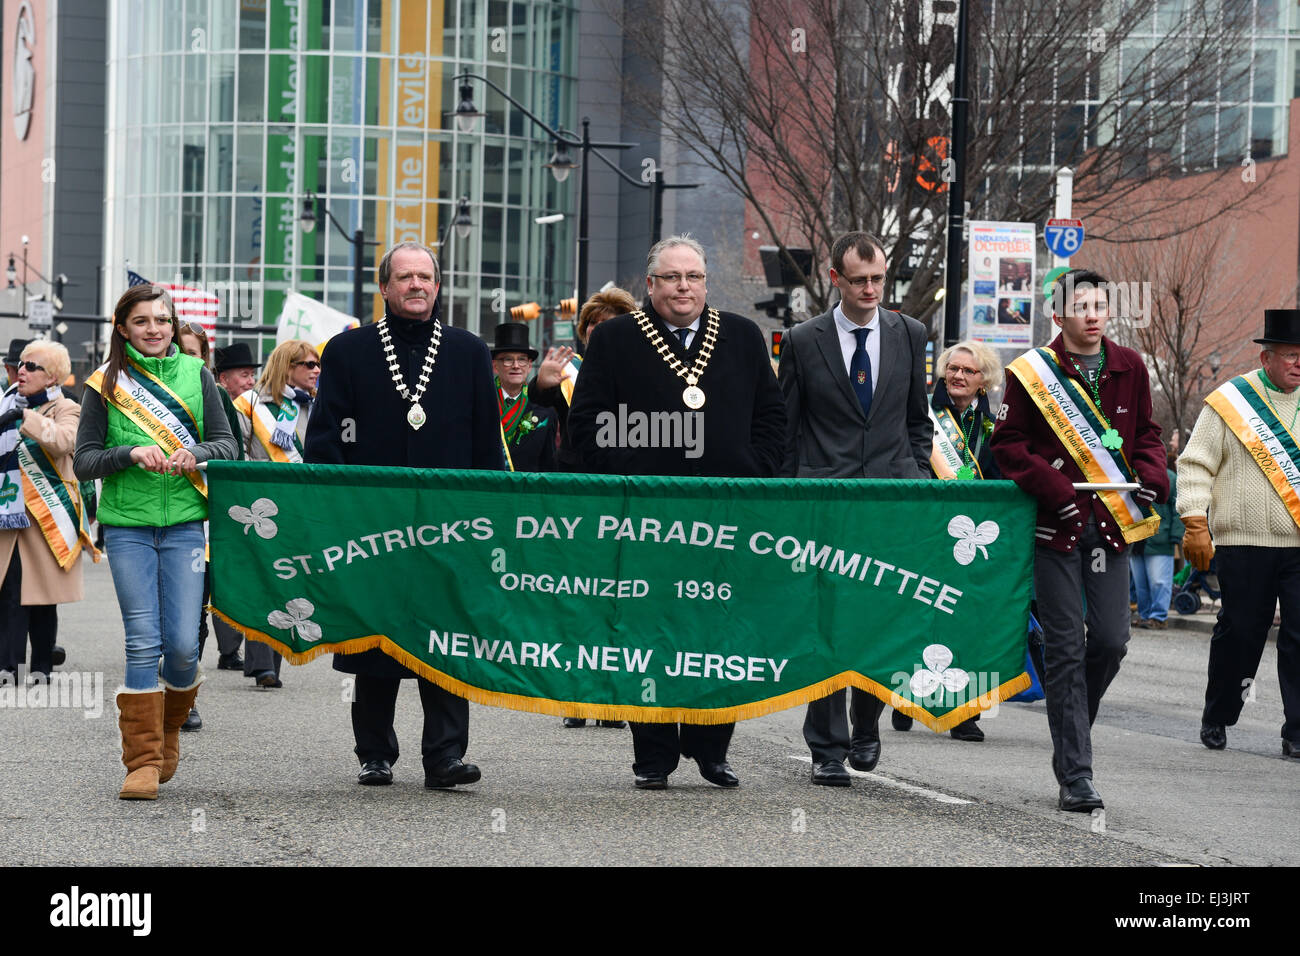 St. Patrick's Day Parade Committee. Newark, New Jersey. USA 2013 Stock Photo